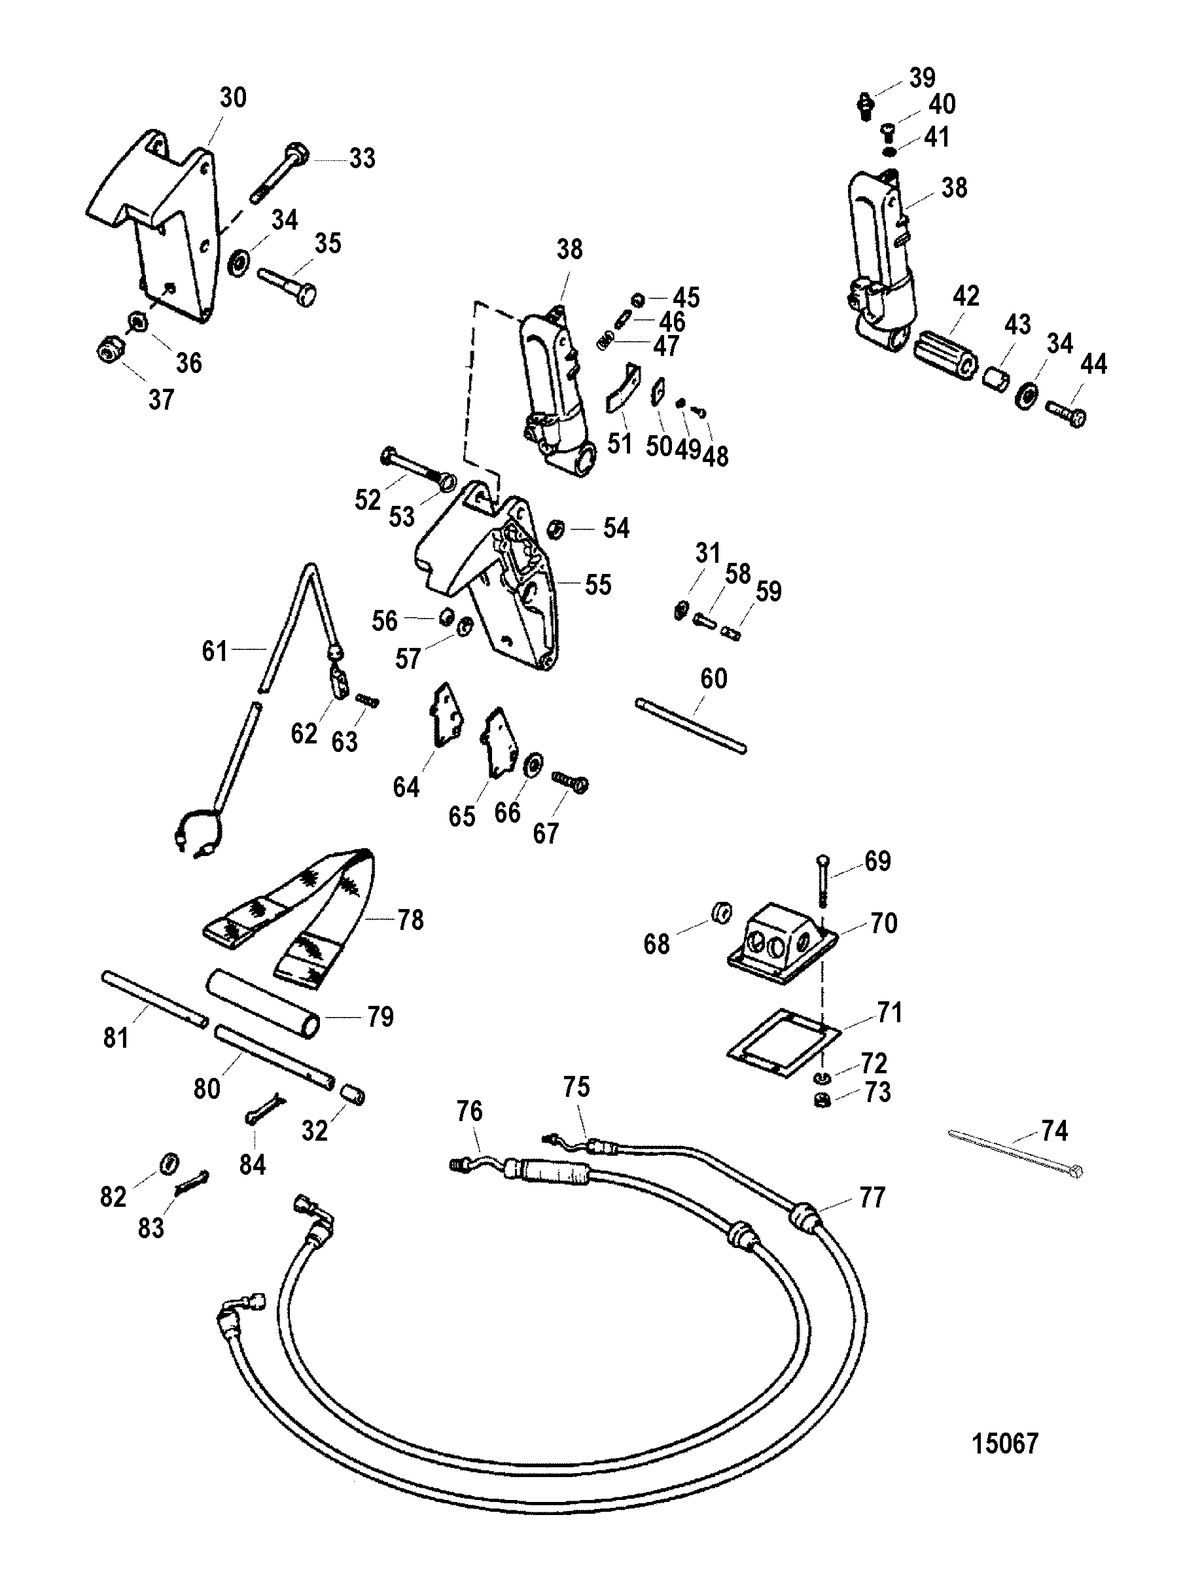 ACCESSORIES TRIM / TILT / LIFT SYSTEMS AND COMPONENTS Power Trim Kit(76509A27) (Page 2 Of 2)